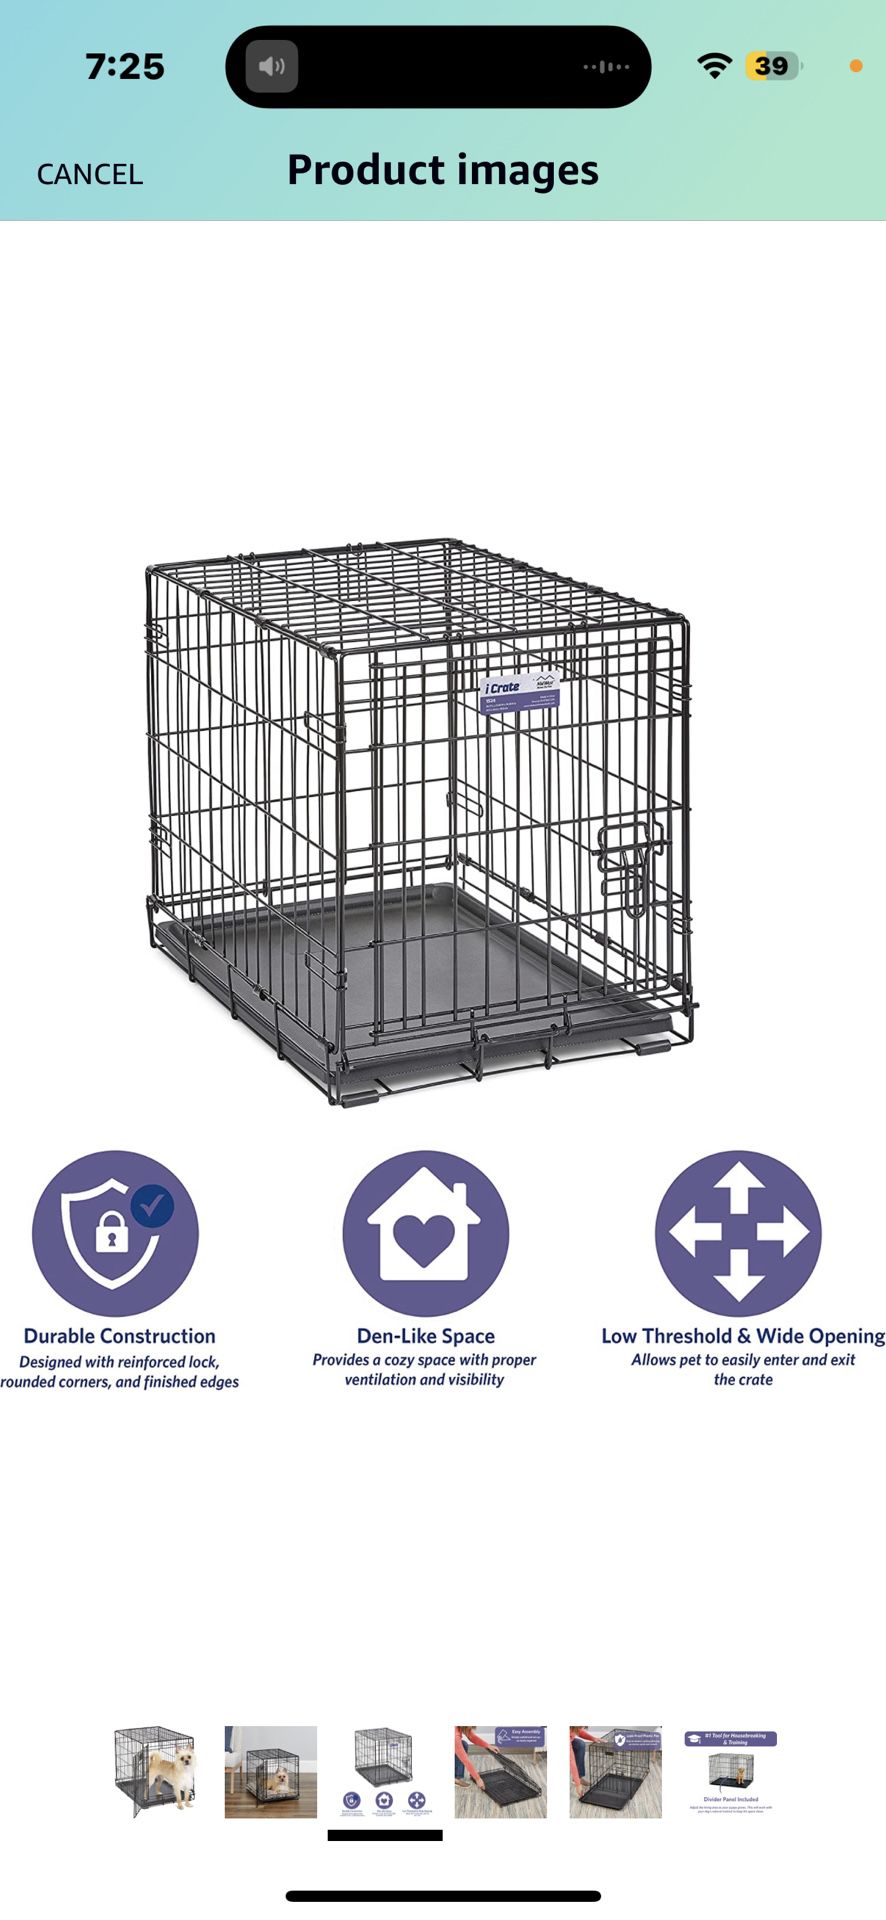 NEW! MidWest Homes for Pets Newly Enhanced Single Door iCrate Dog Crate, Includes Leak-Proof Pan, Floor Protecting Feet, Divider Panel & New Paten